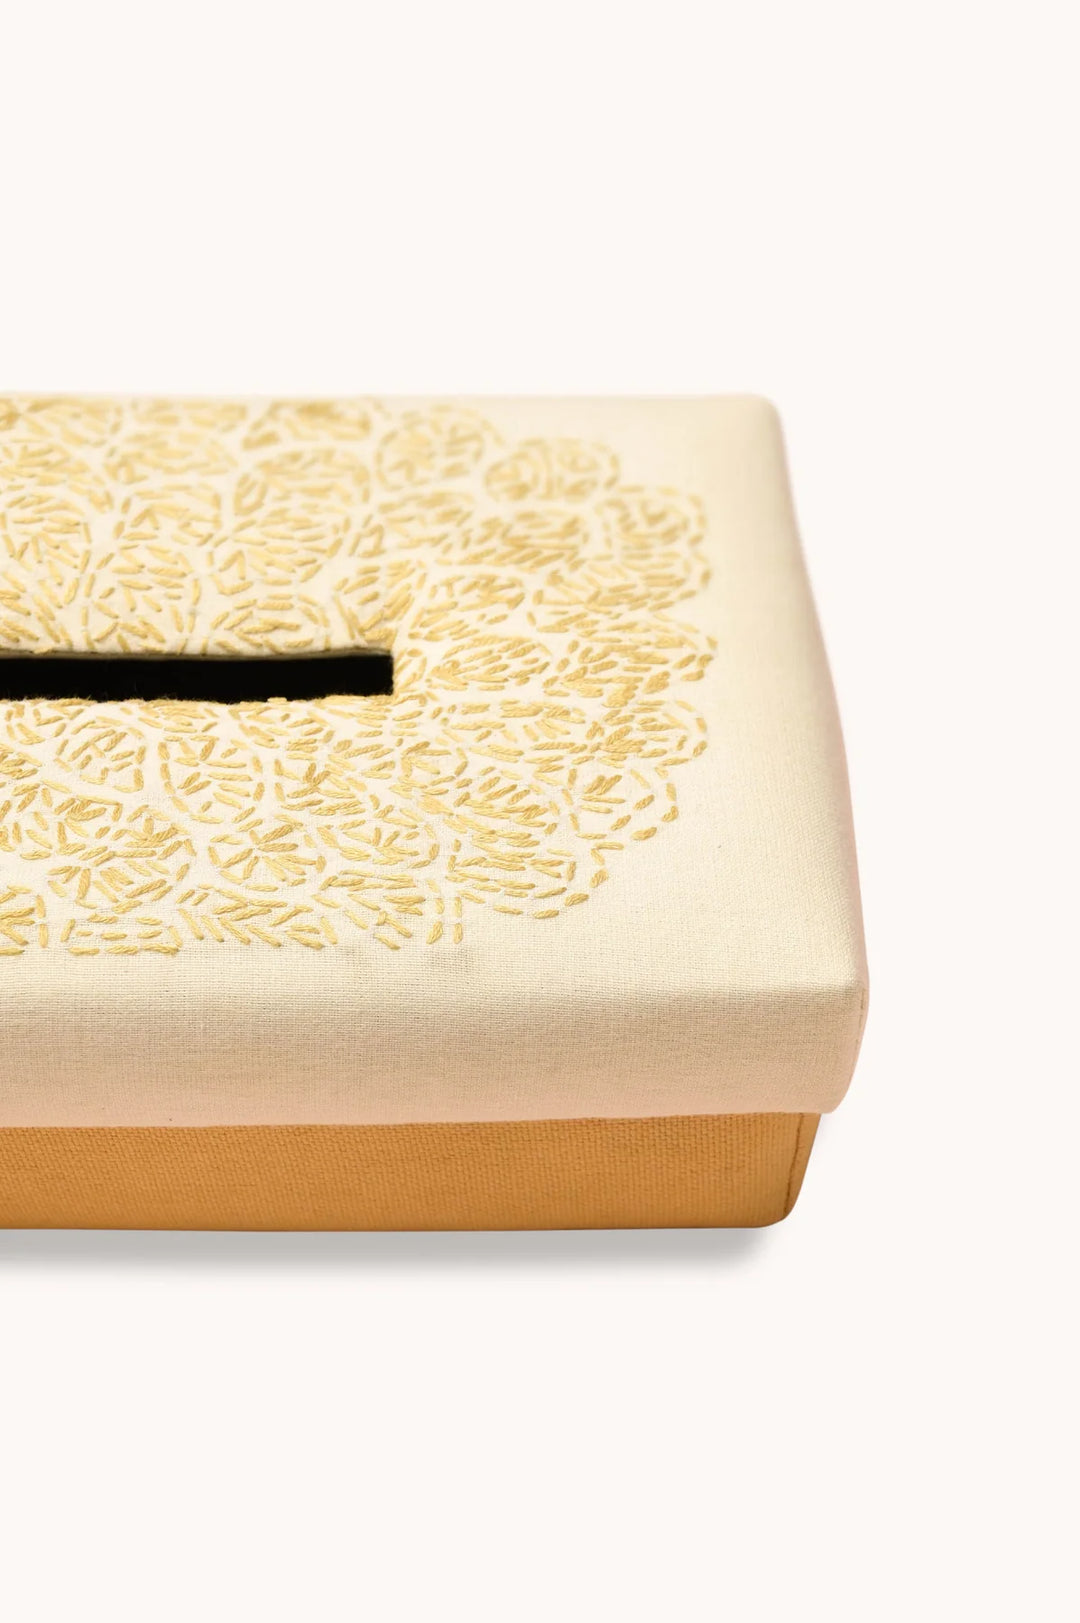 Japanese Floral Design Tissue Box with Gold Accent | Lucia Handwoven Tissue Box - Yellow